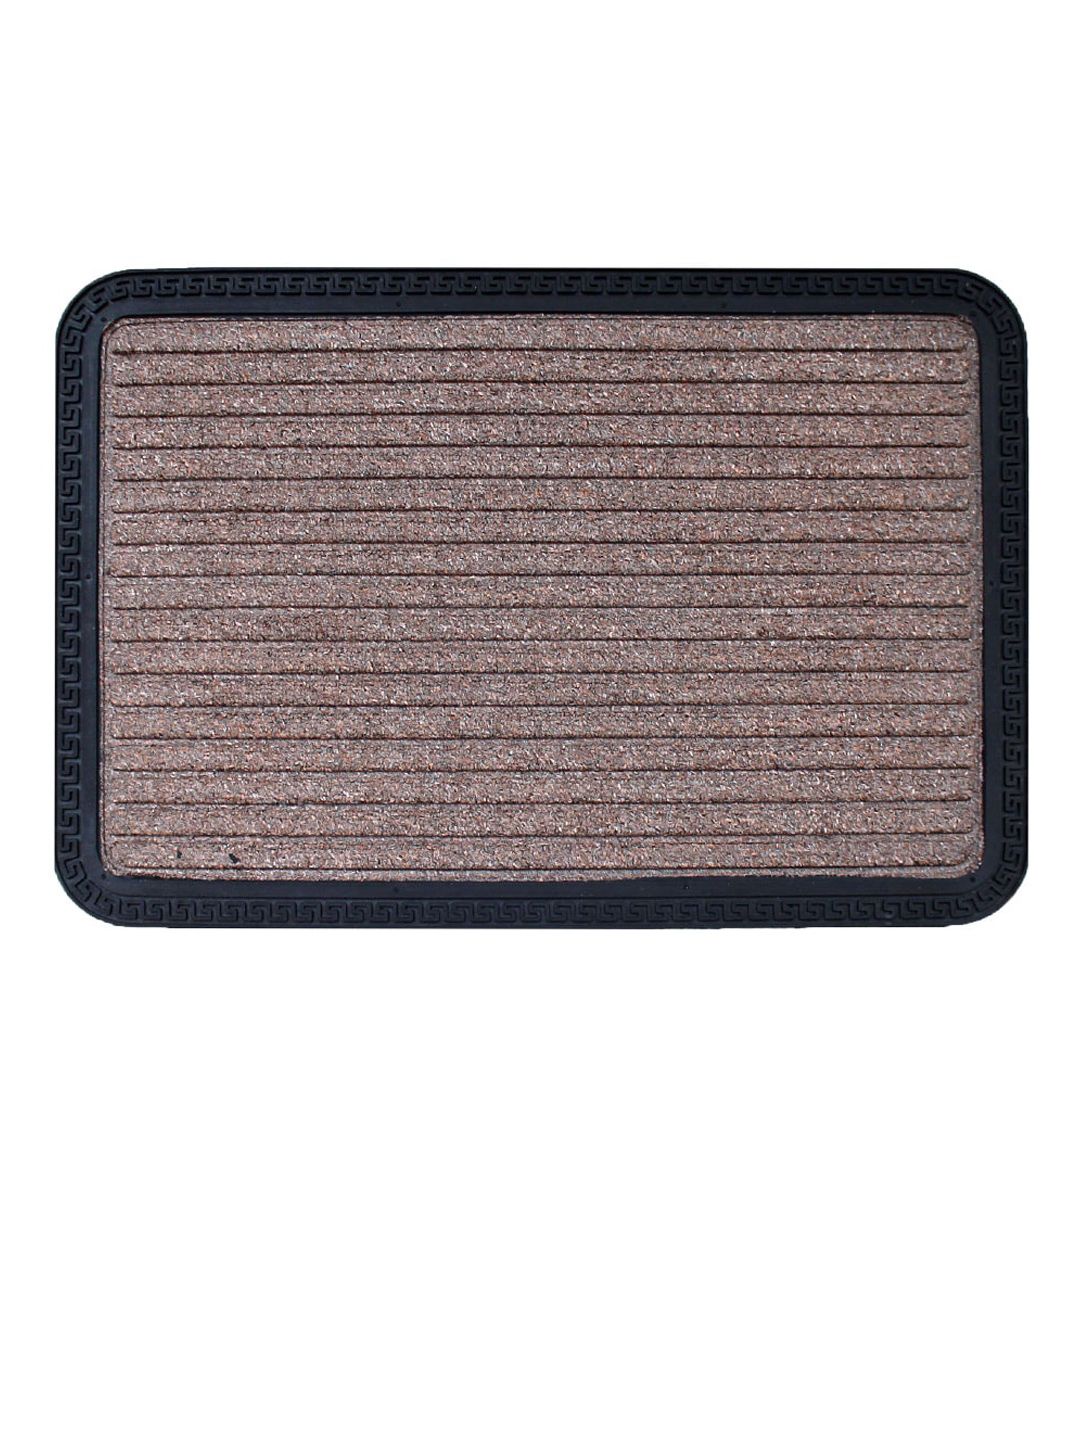 LUXEHOME INTERNATIONAL Grey Stiped Anti Skid Door Mat Price in India